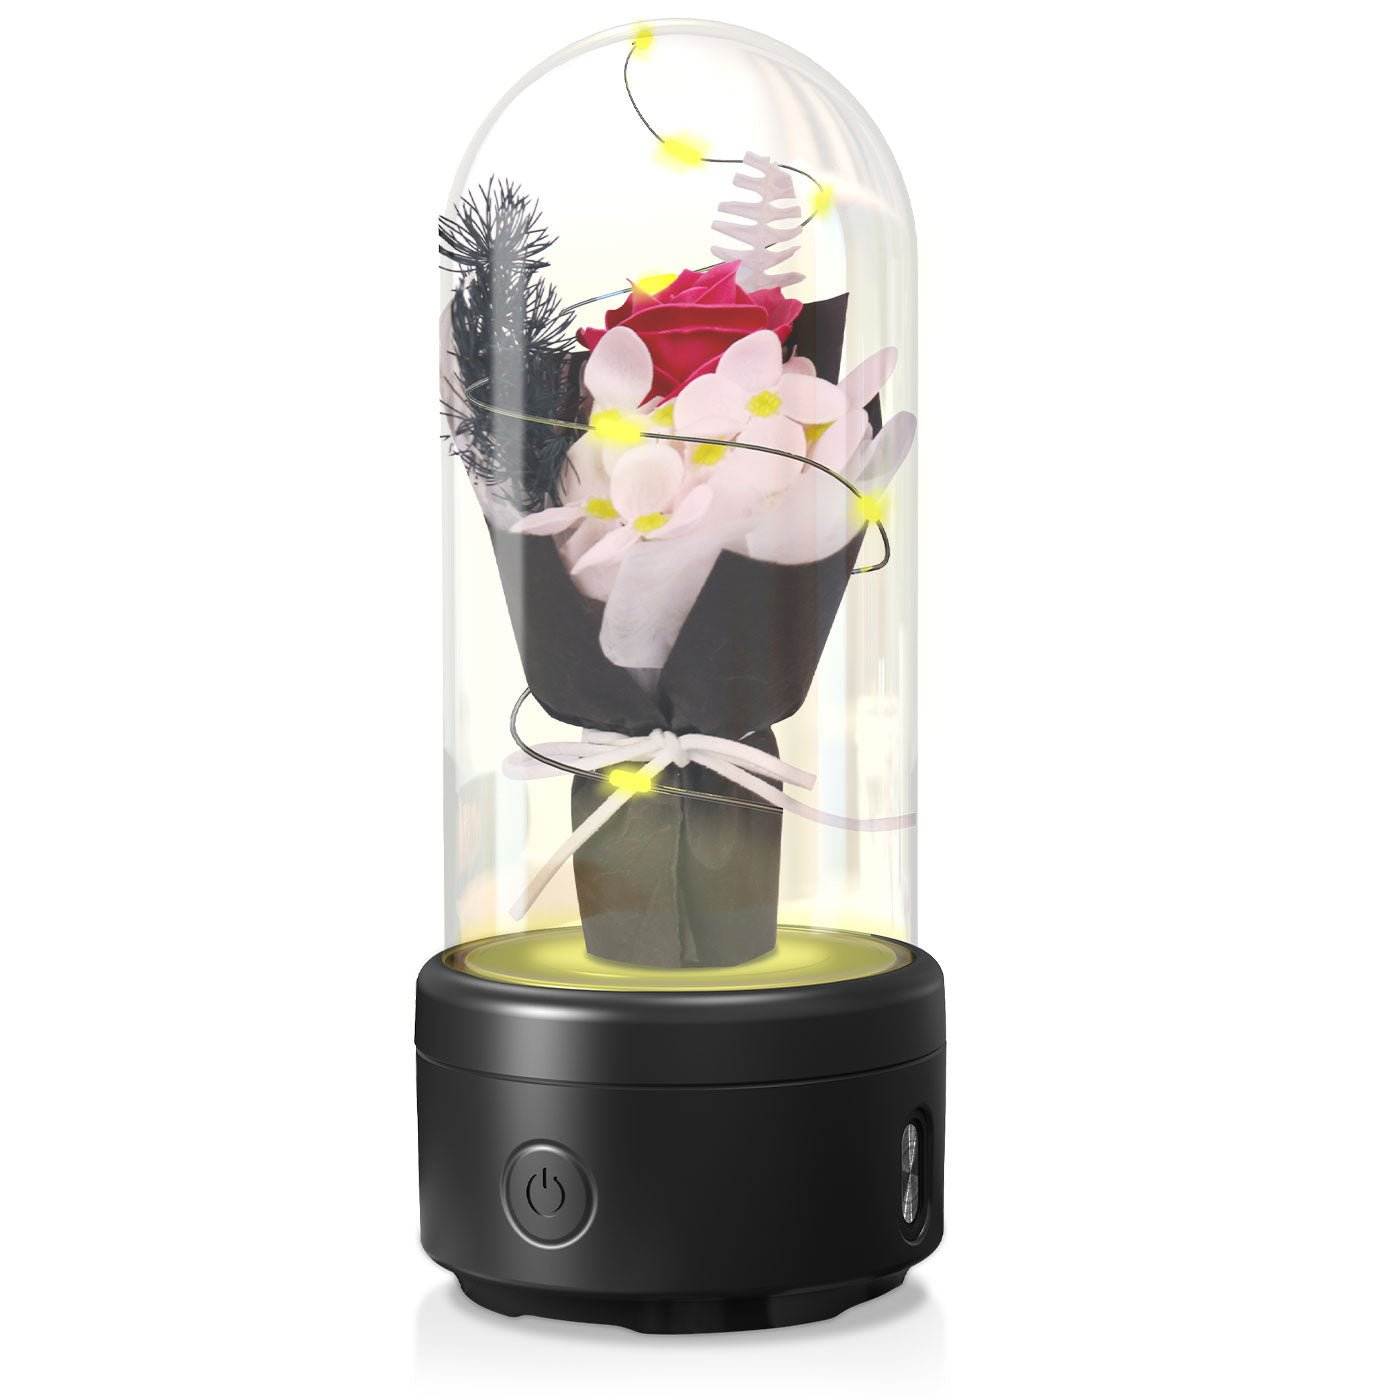 Bluetooth Speaker Gift Rose Luminous Night Light Ornament 2 In 1 Bouquet LED Light And Bluetooth Speaker Gift Rose Luminous Nigh J&E Discount Store 